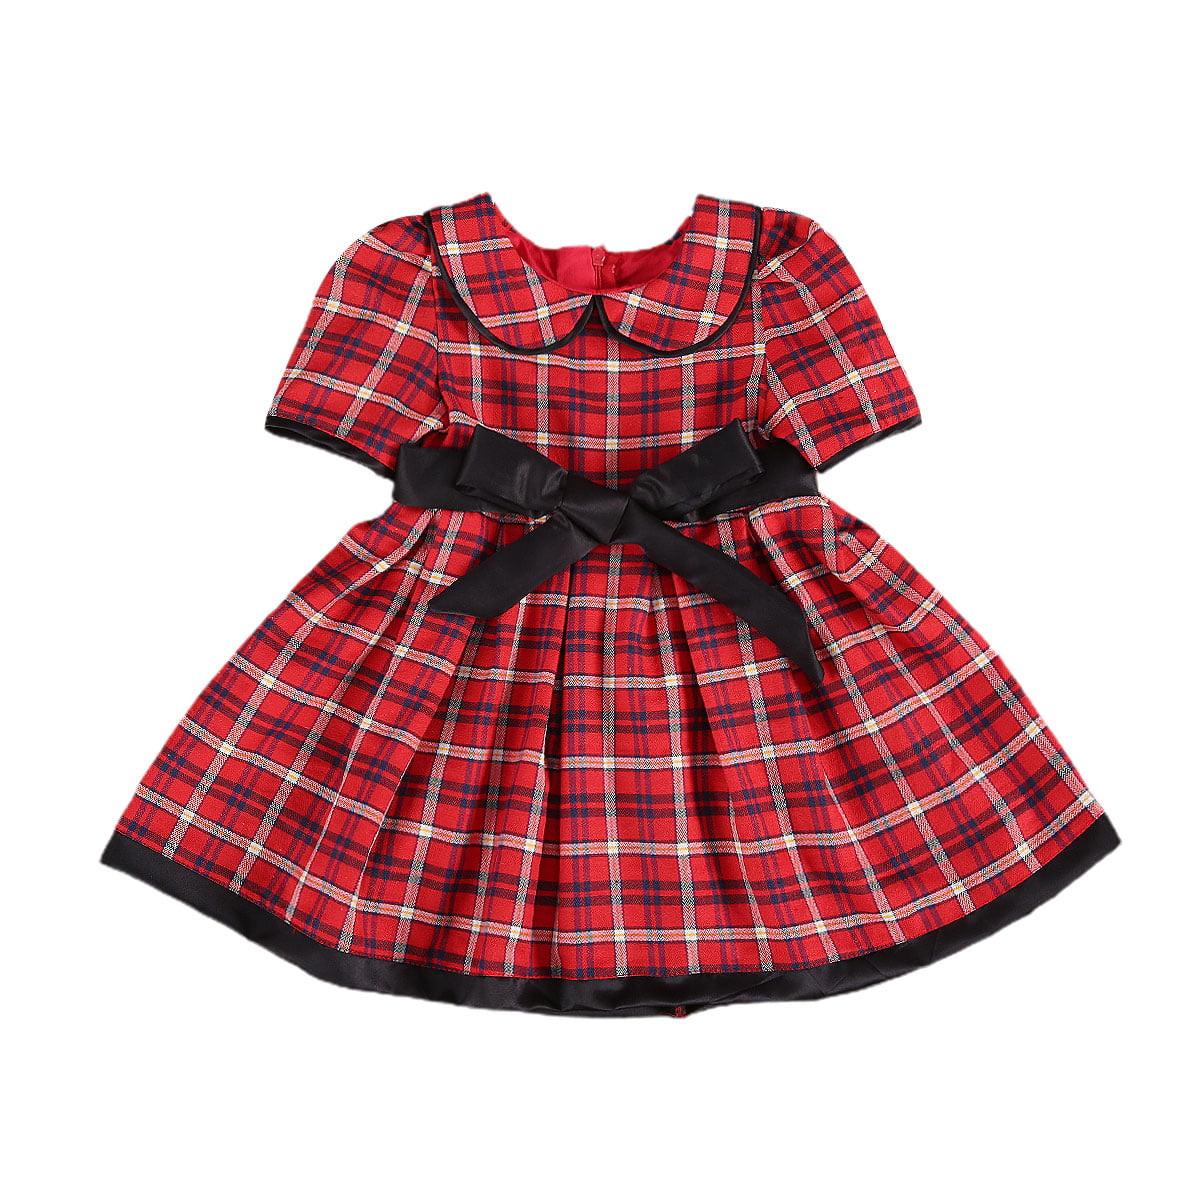 Toddler Baby Girls Christmas Dress Bowknot Plaid Party Pageant Princess Tutu Dresses Baby Girl Clothes